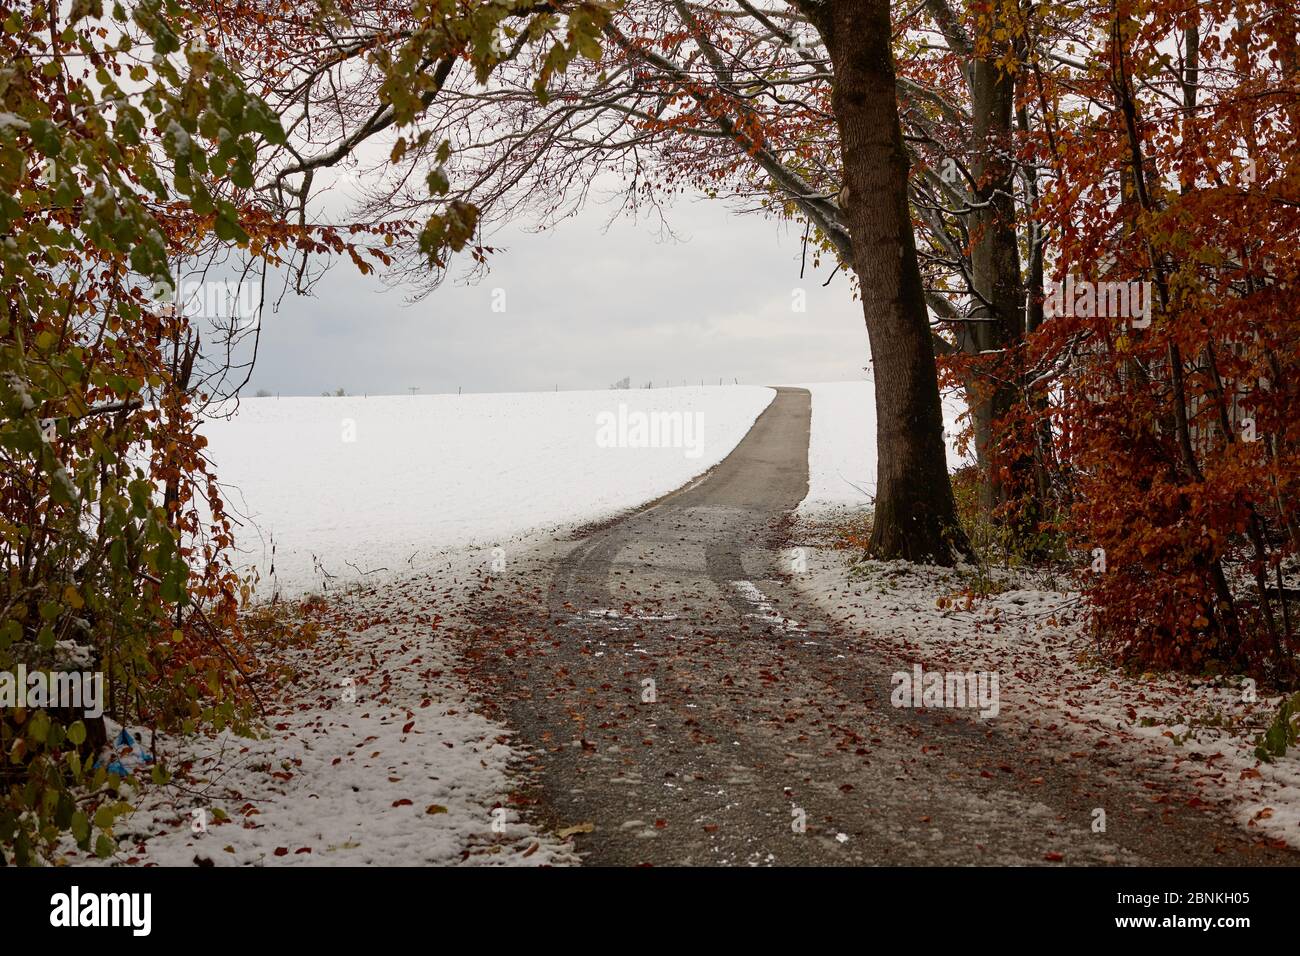 Country road, leaves, ice, snow, wetness, forest, glade, Stock Photo